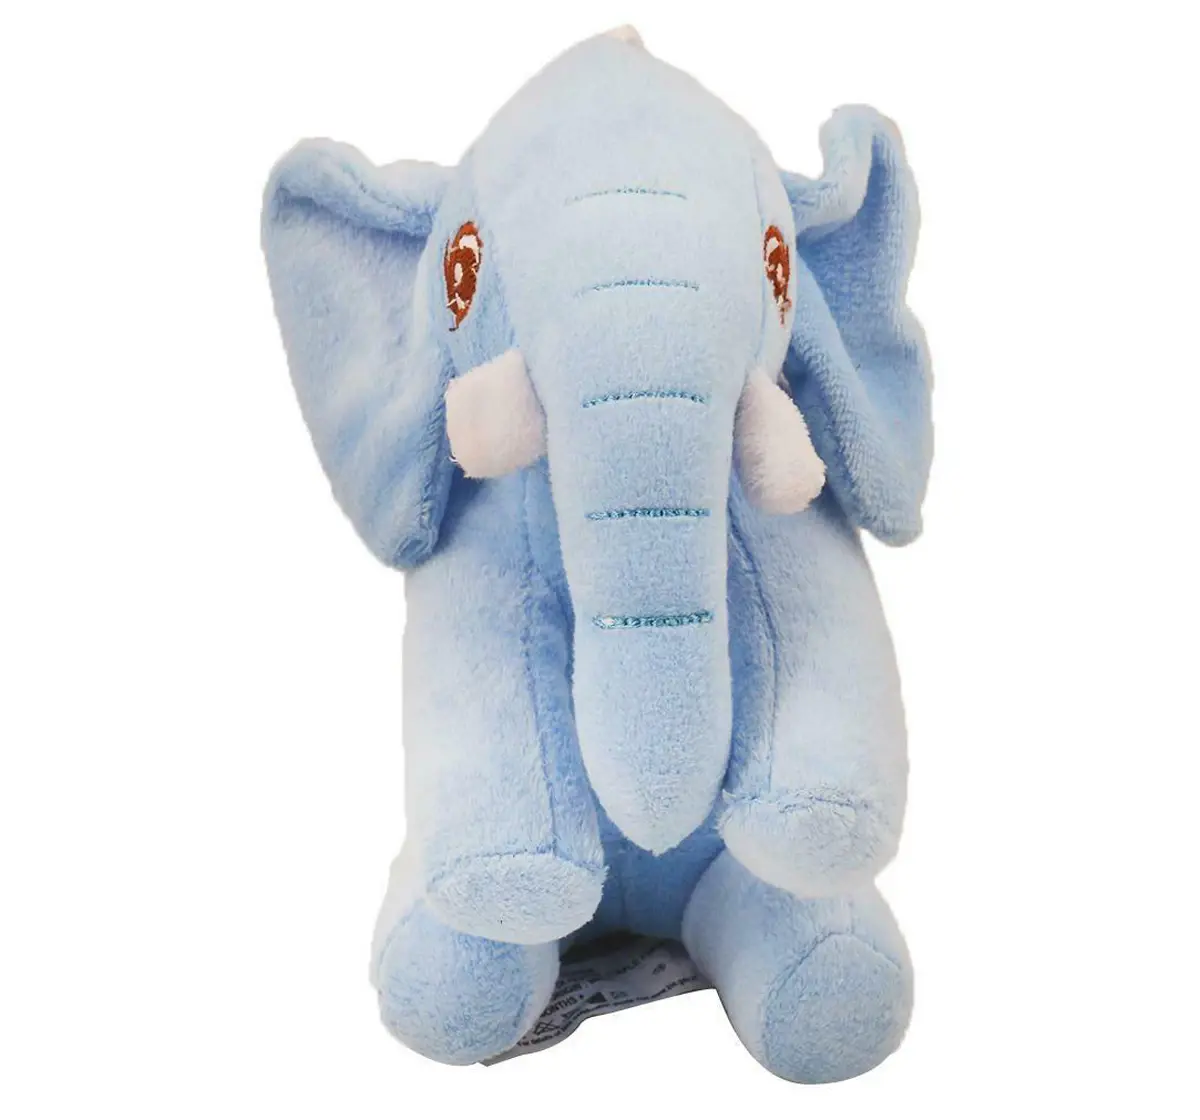 Toy Tales Missy Elephant Soft Toys, 18 Cm, 3Y+, Multicolor